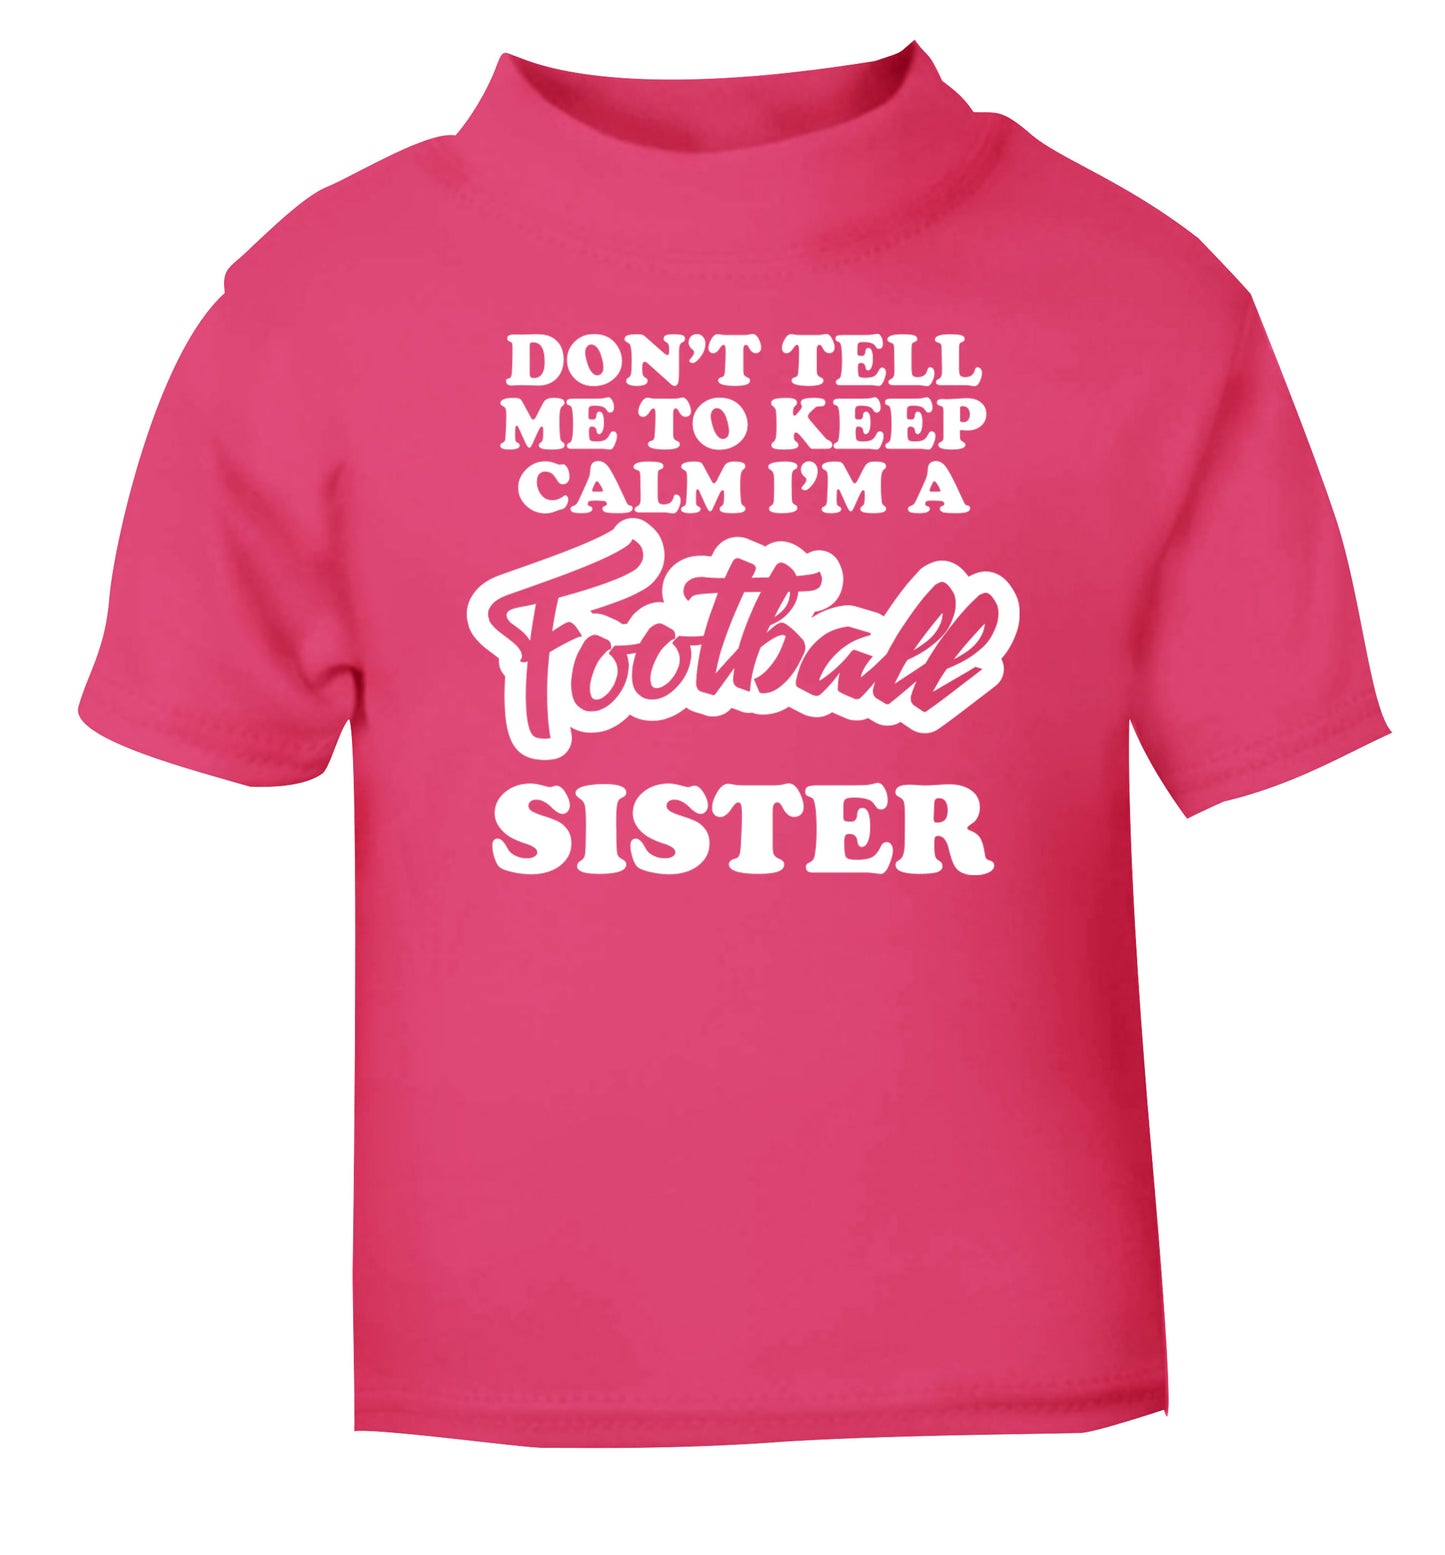 Don't tell me to keep calm I'm a football sister pink Baby Toddler Tshirt 2 Years